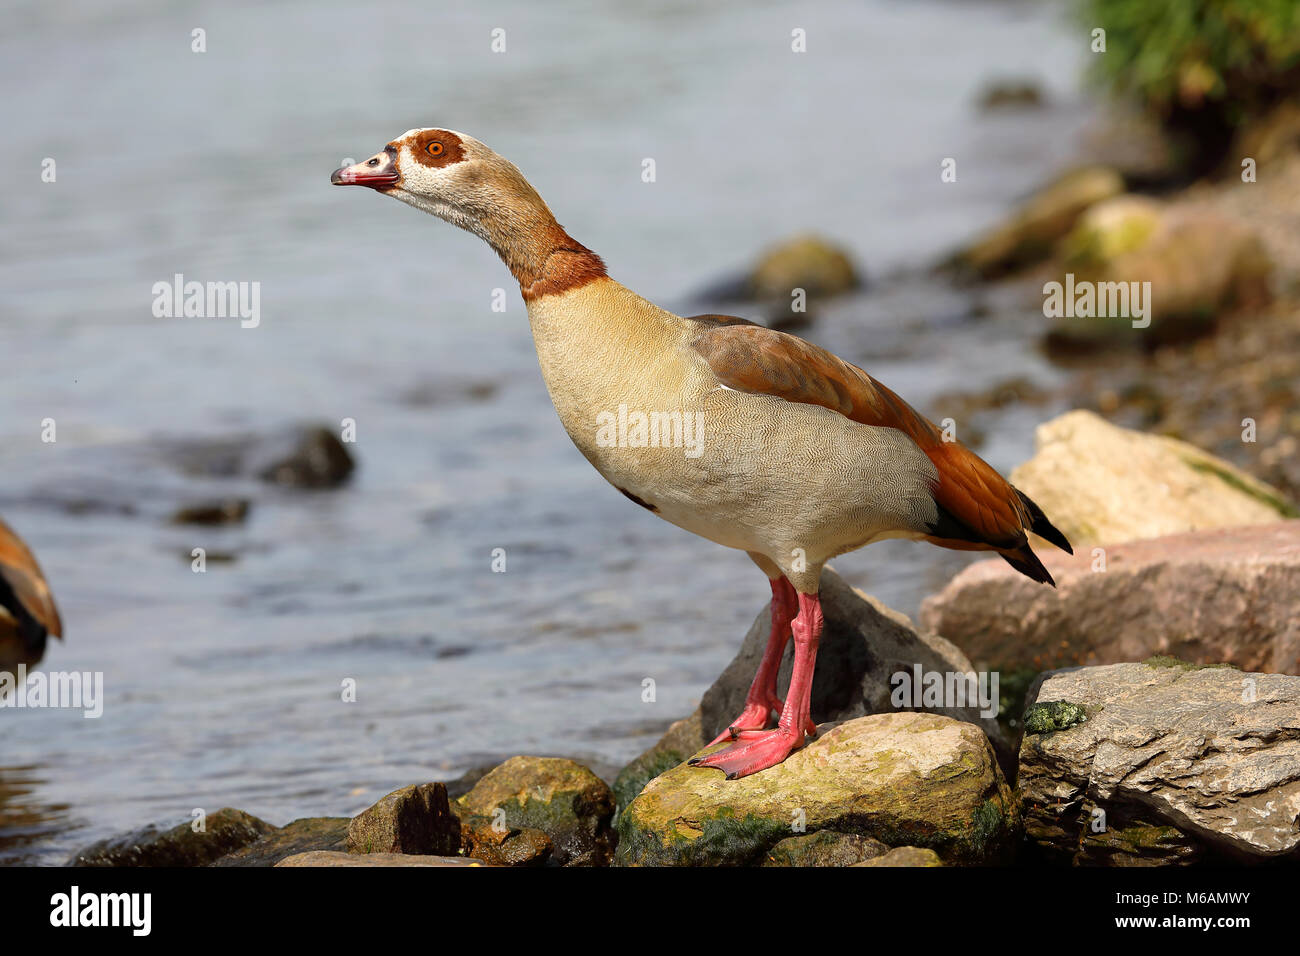 Egyptian goose (Alopochen aegyptiacus), adult bird stands on stones on the banks of the Moselle, Rhineland-Palatinate, Germany Stock Photo